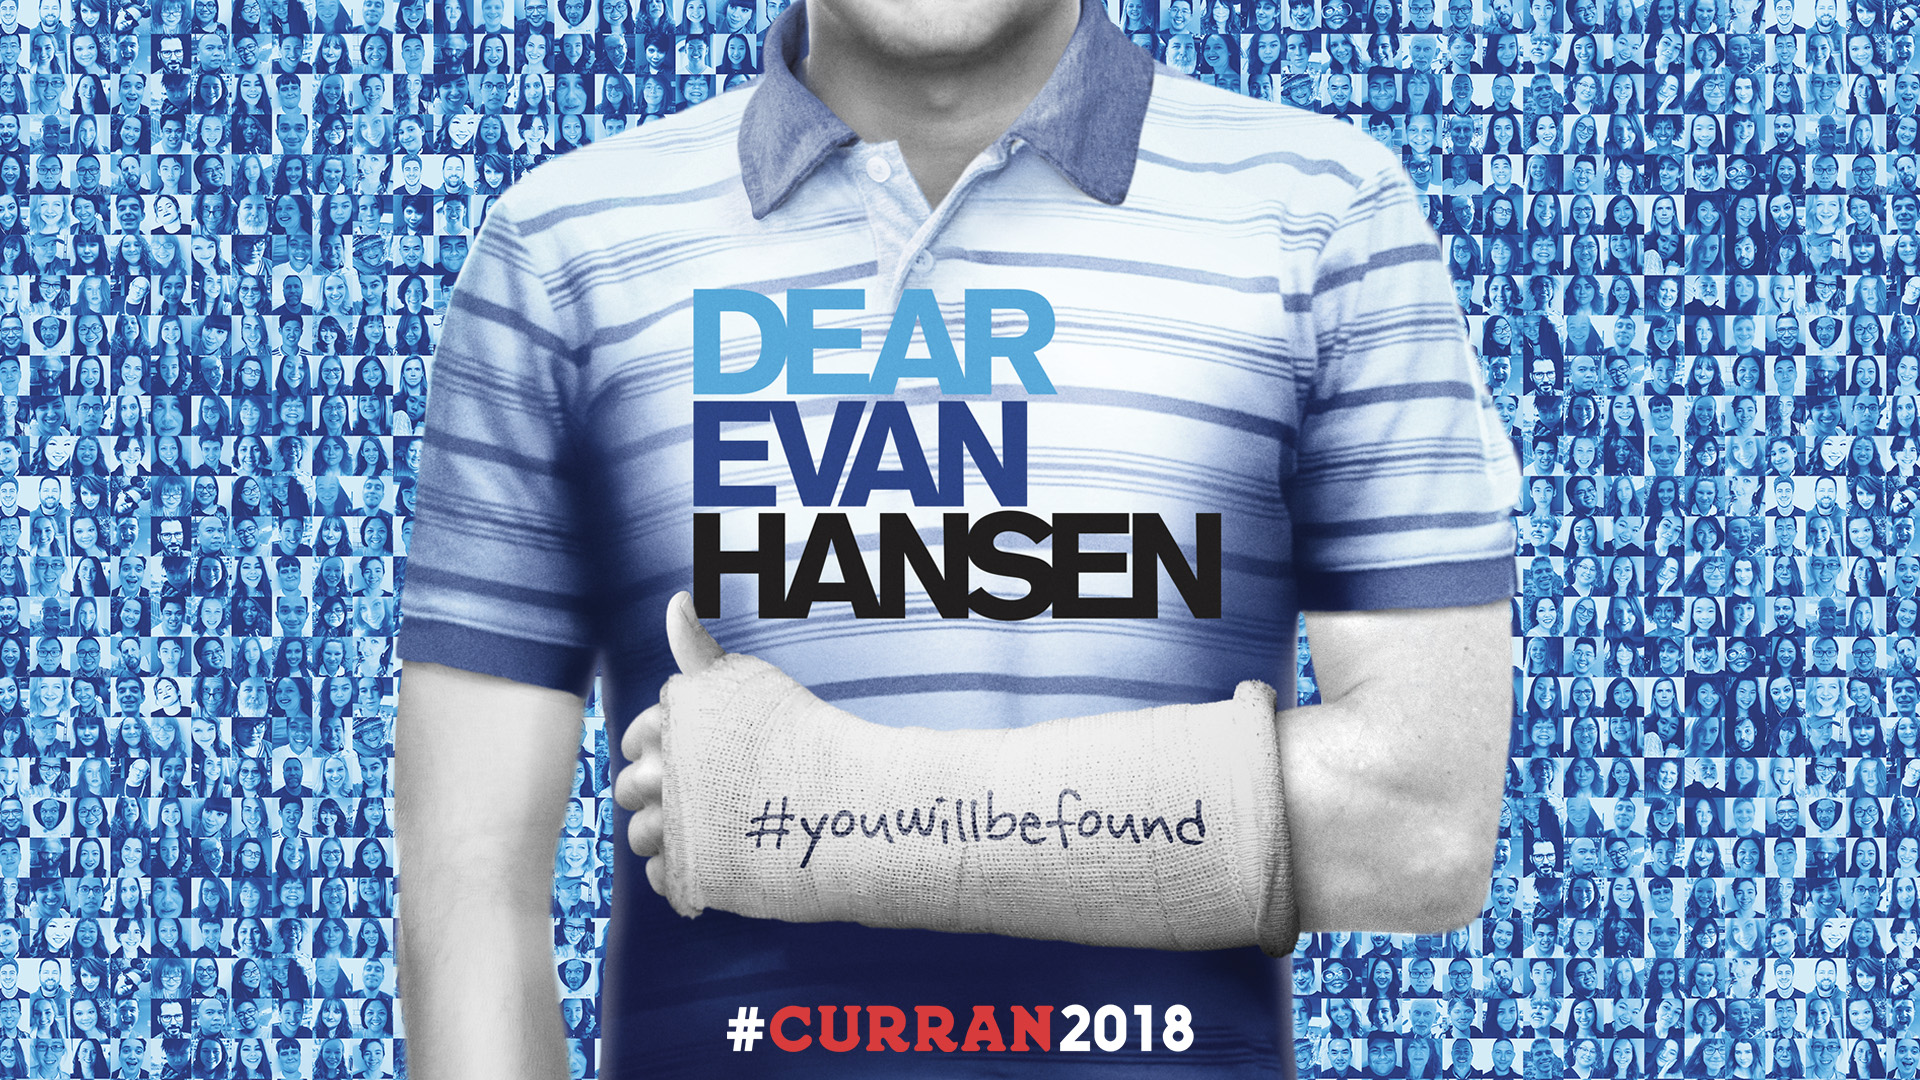 Dear Evan Hansen, thanks for finding us. We've been waiting for a musical like you. The Curran San Francisco